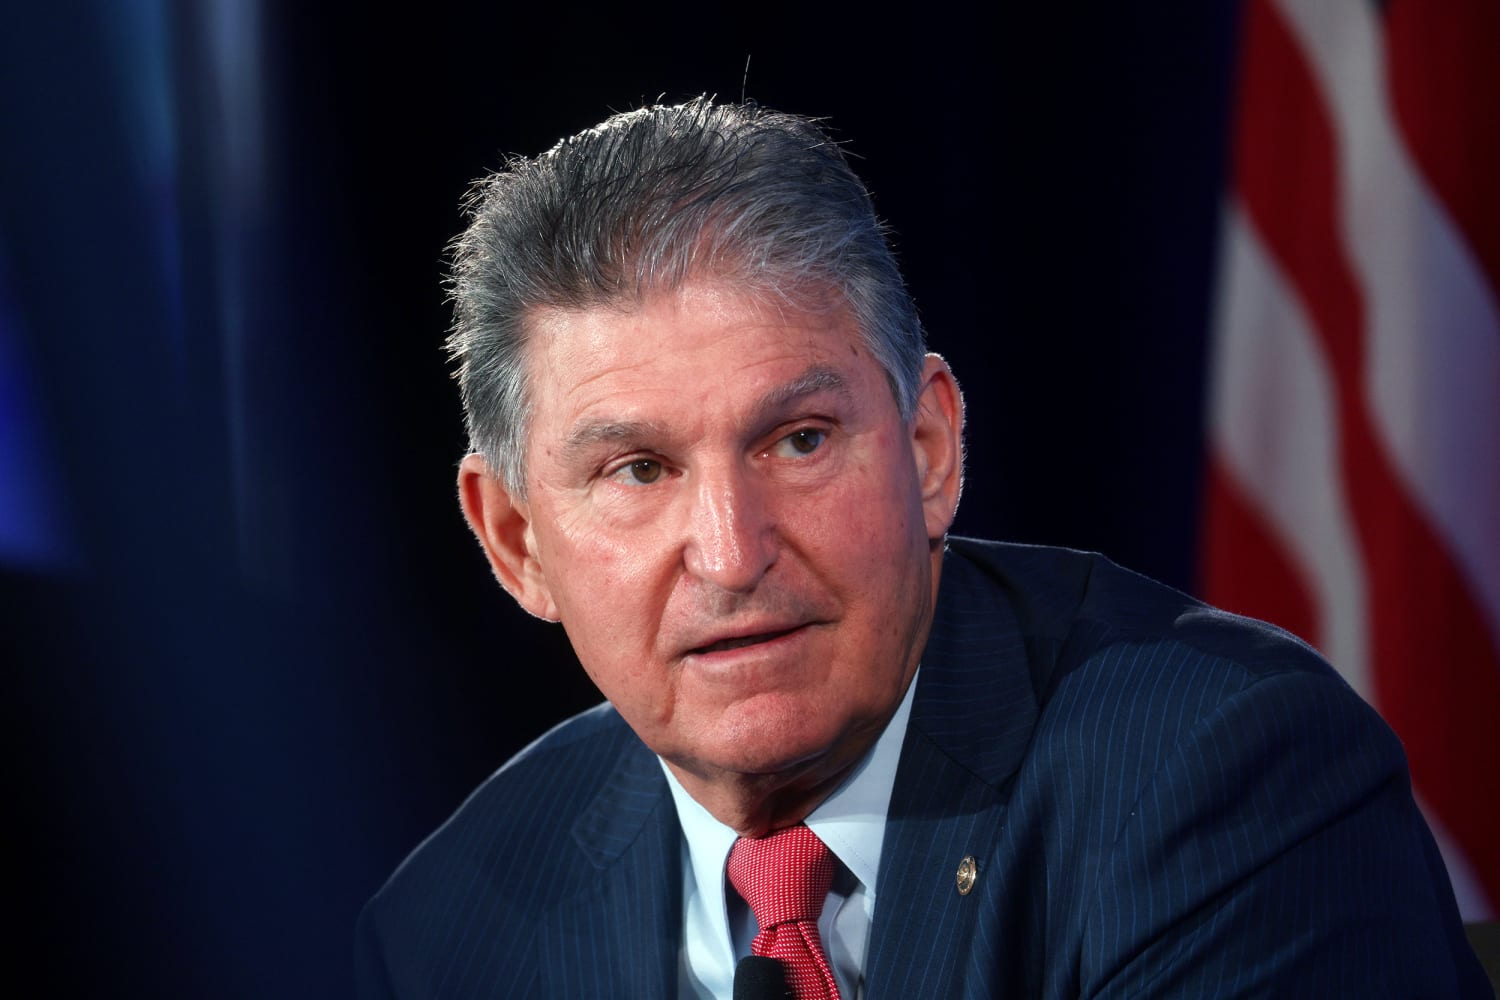 Manchin casts doubt on including paid family leave, Medicare vouchers in spending bill